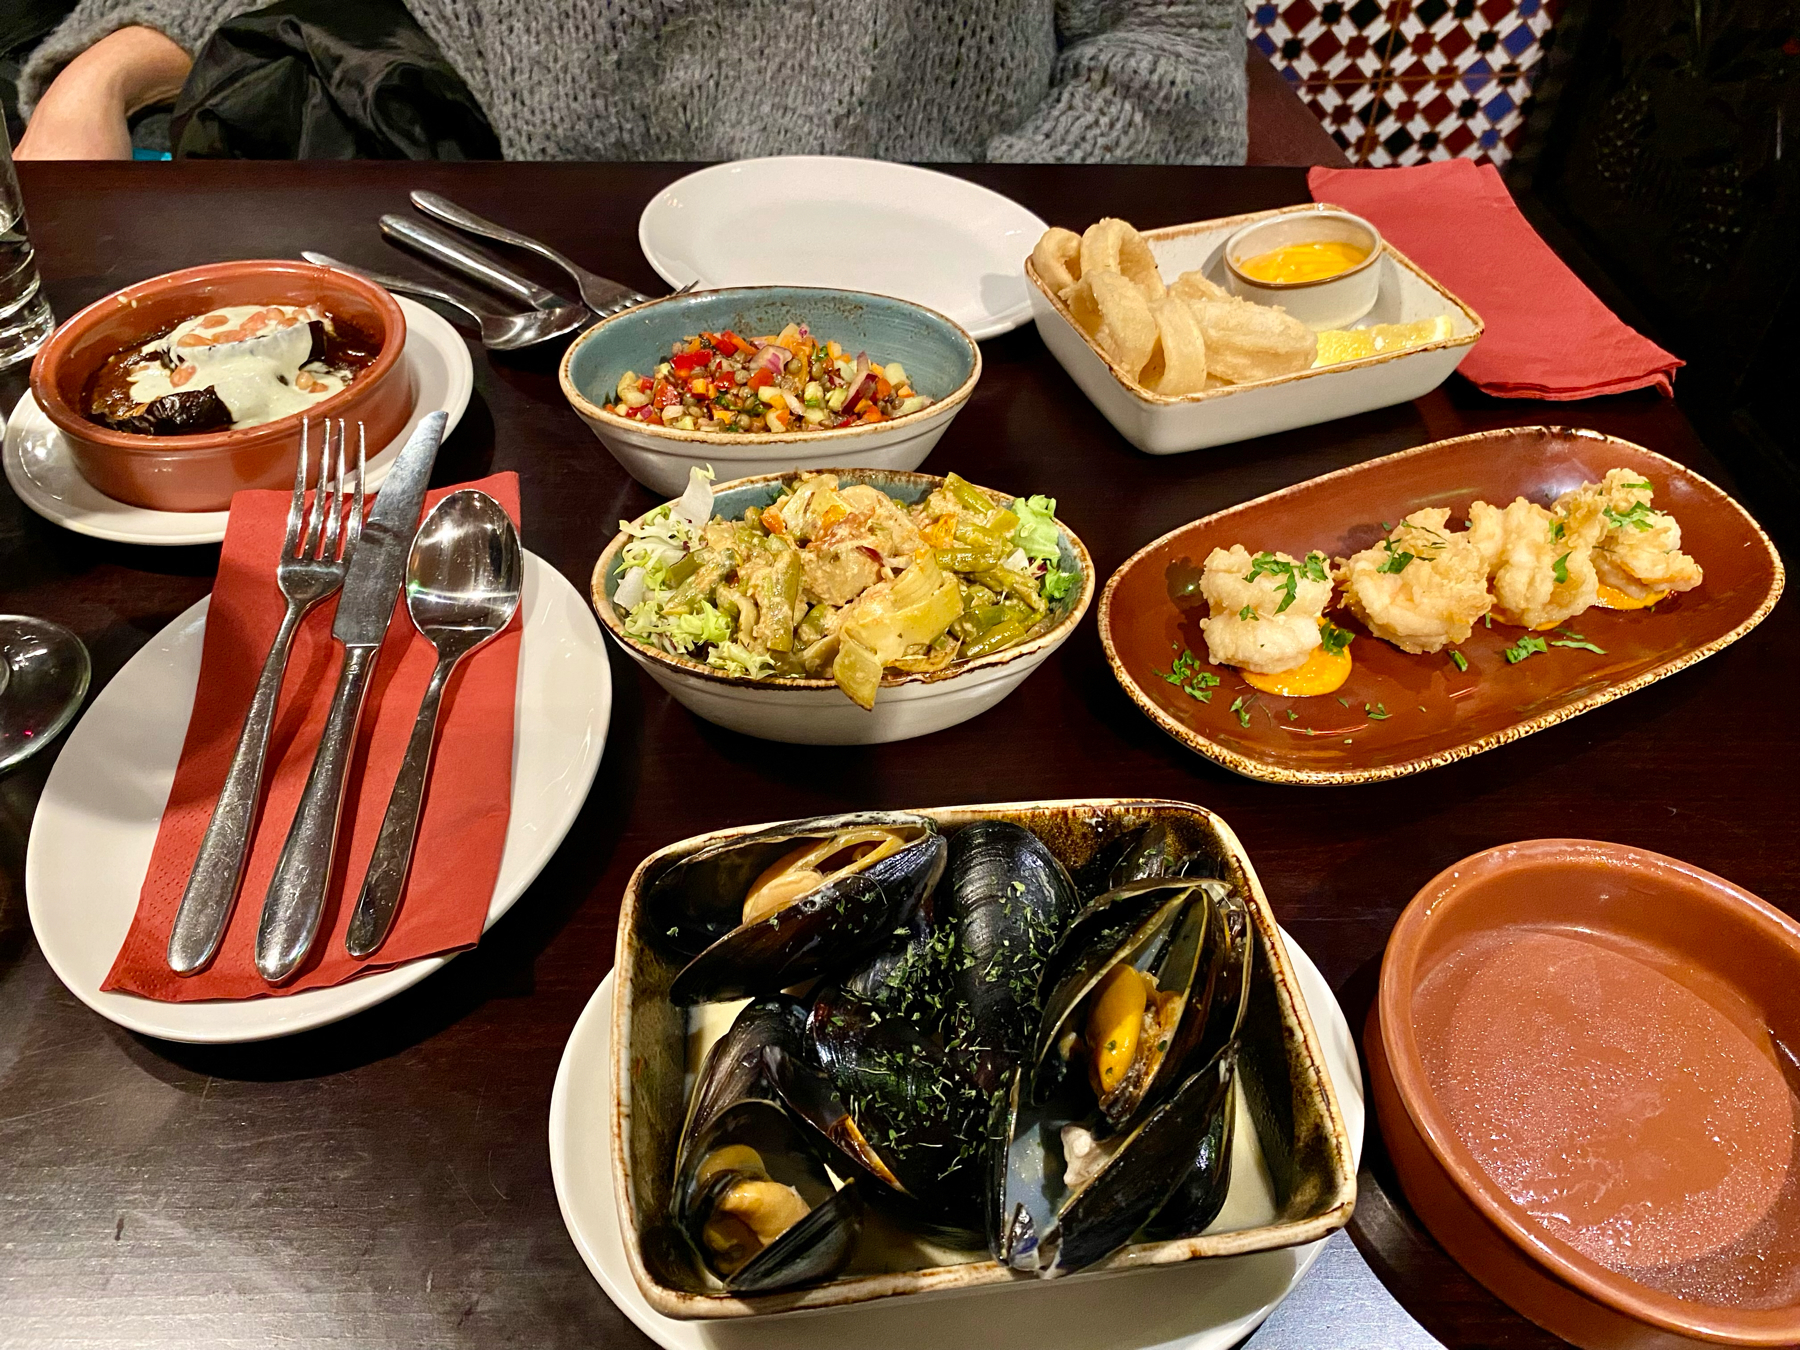 Small plates of food on a table - mussels, prawns, calamari and salads